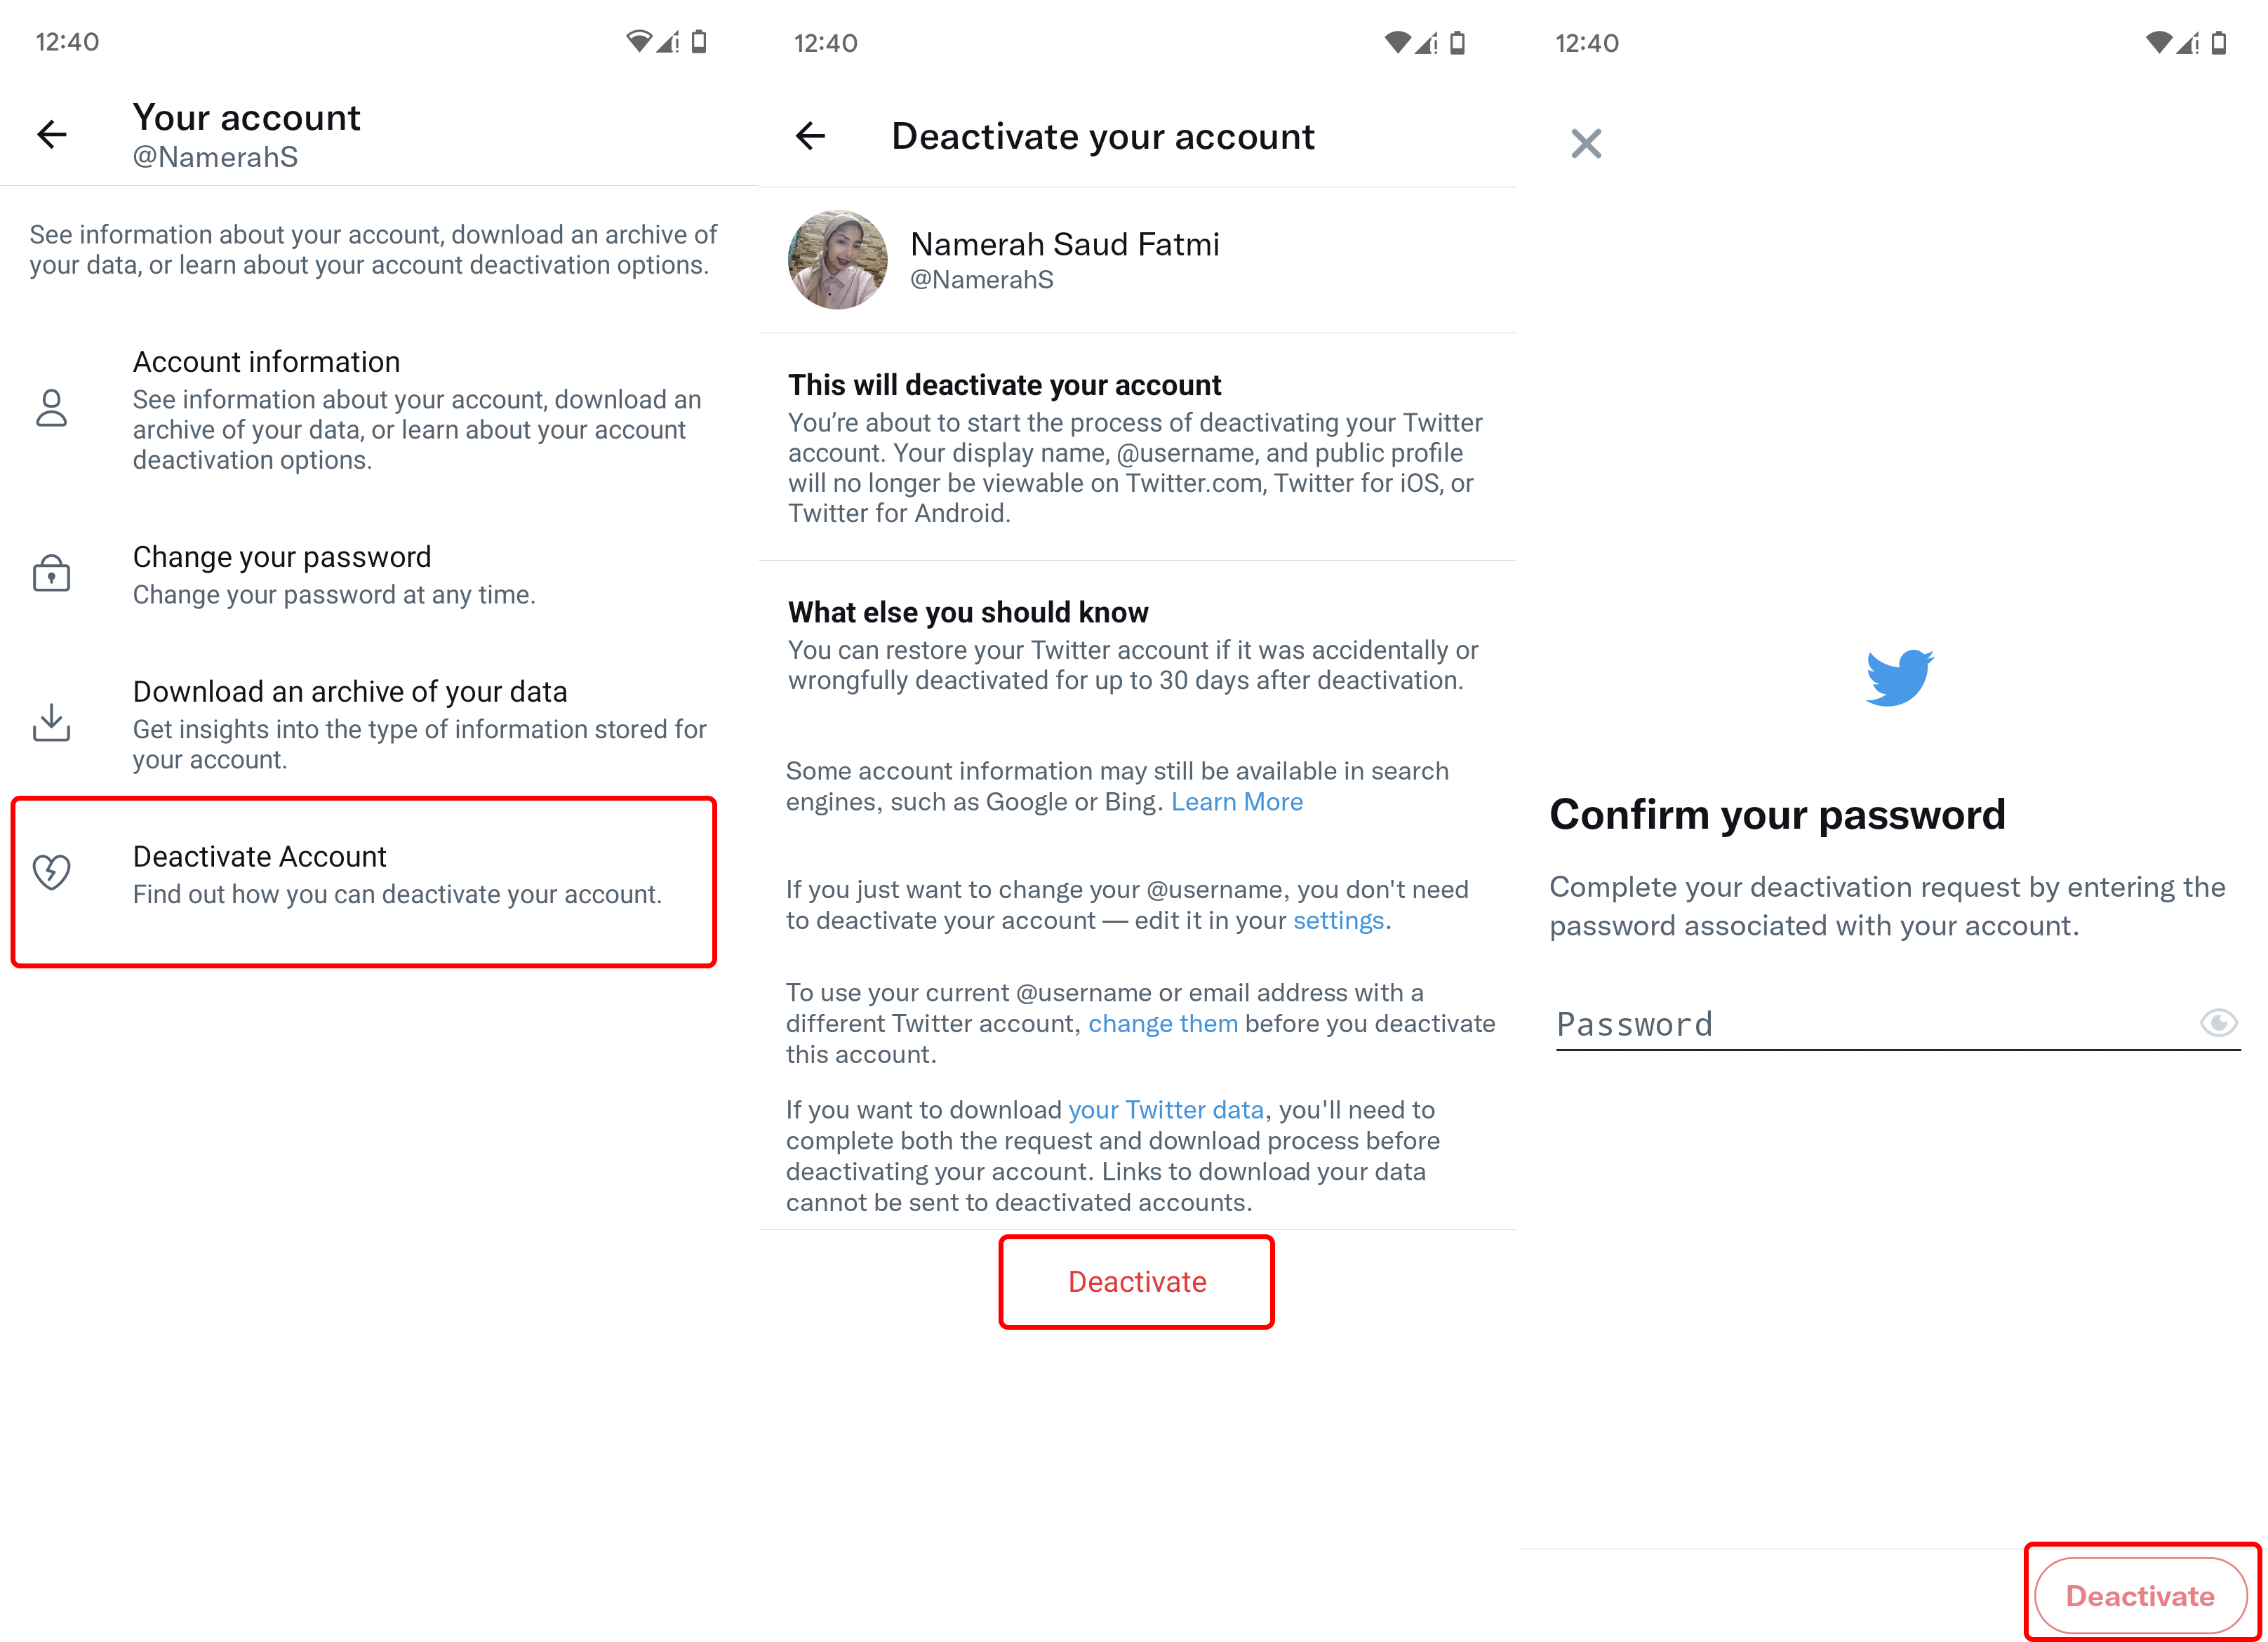 How to delete your Twitter account on Android